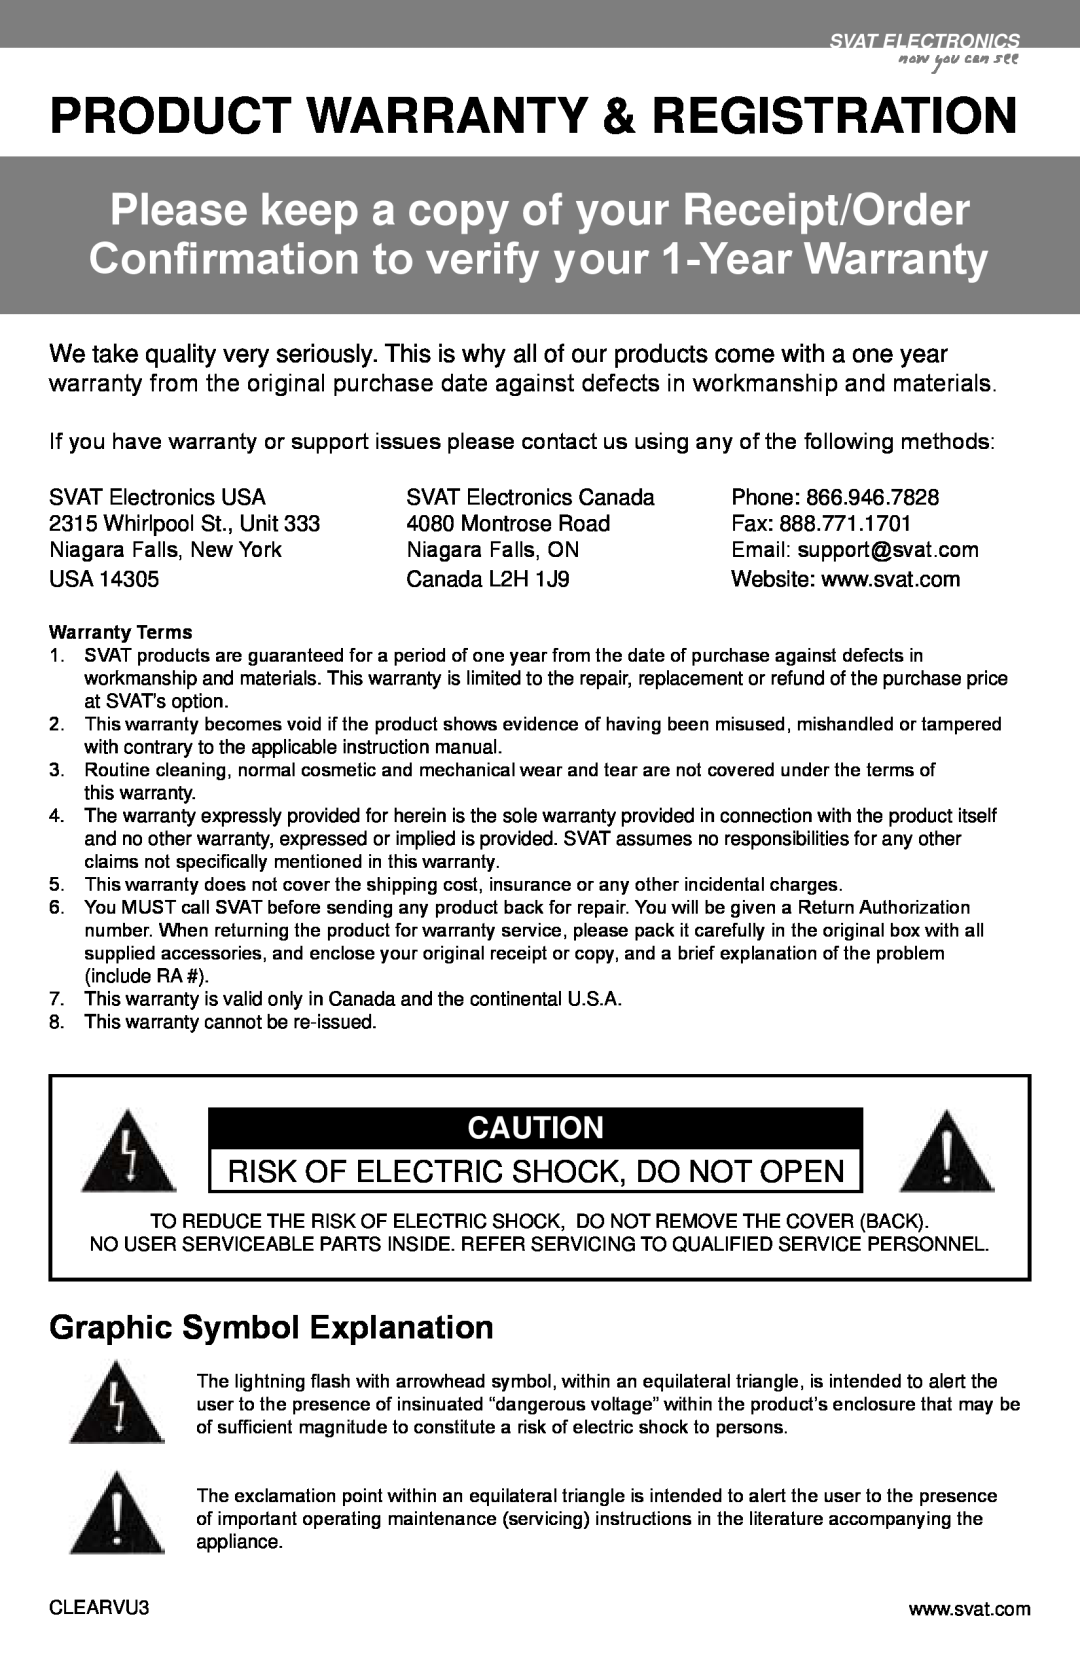 SVAT Electronics CLEARVU3 Product Warranty & Registration, Graphic Symbol Explanation, Risk Of Electric Shock, Do Not Open 